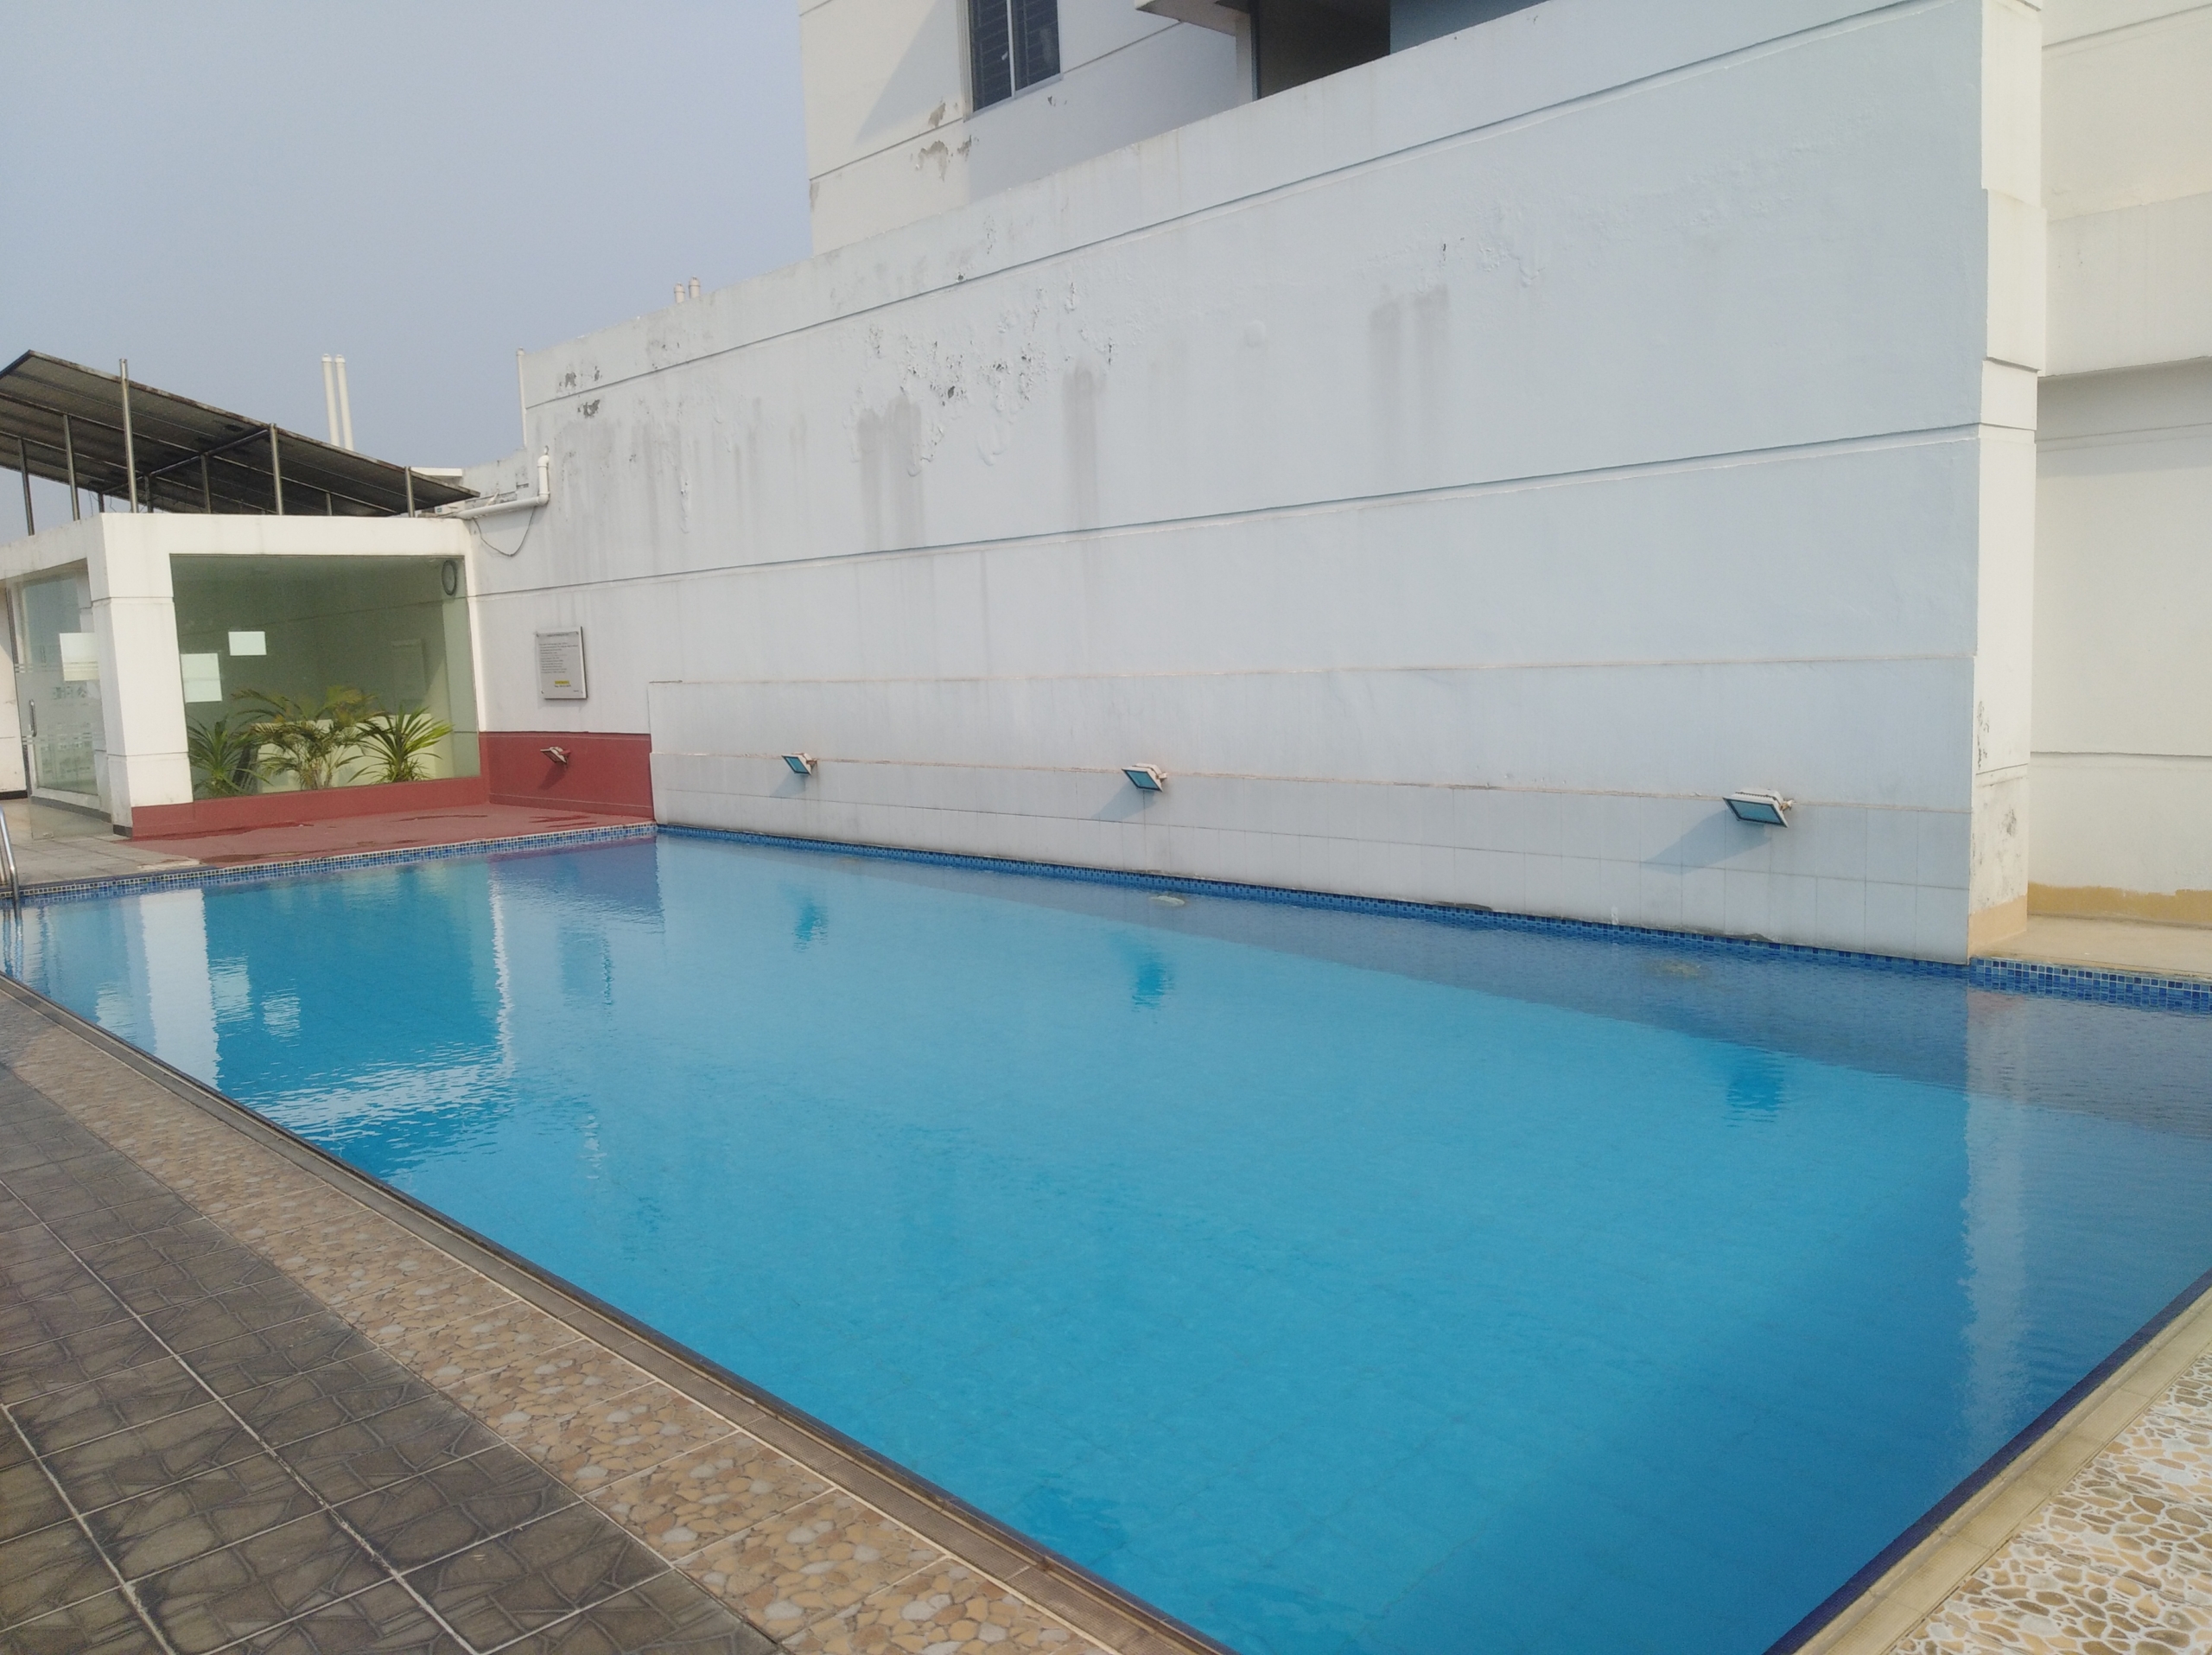 Swimming Pool Gymnasium 4 Bed 2 Car parking Luxury Apartment Sale At Gulshan-2